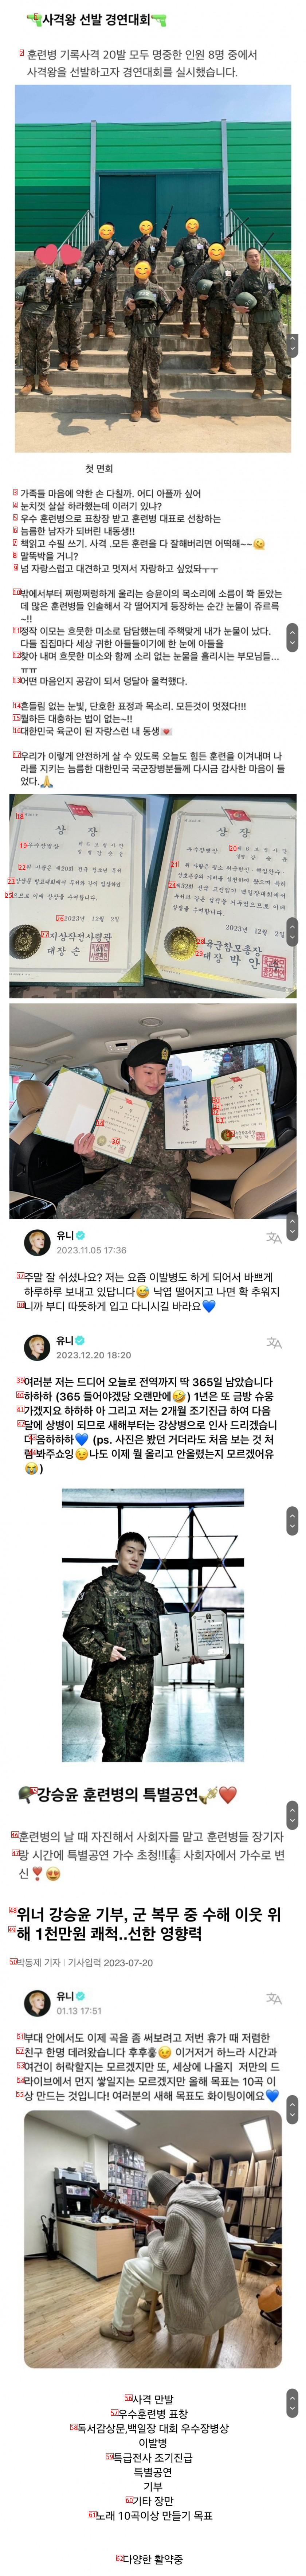 WINNER's Kang Seung Yoon, who is serving in the military. C